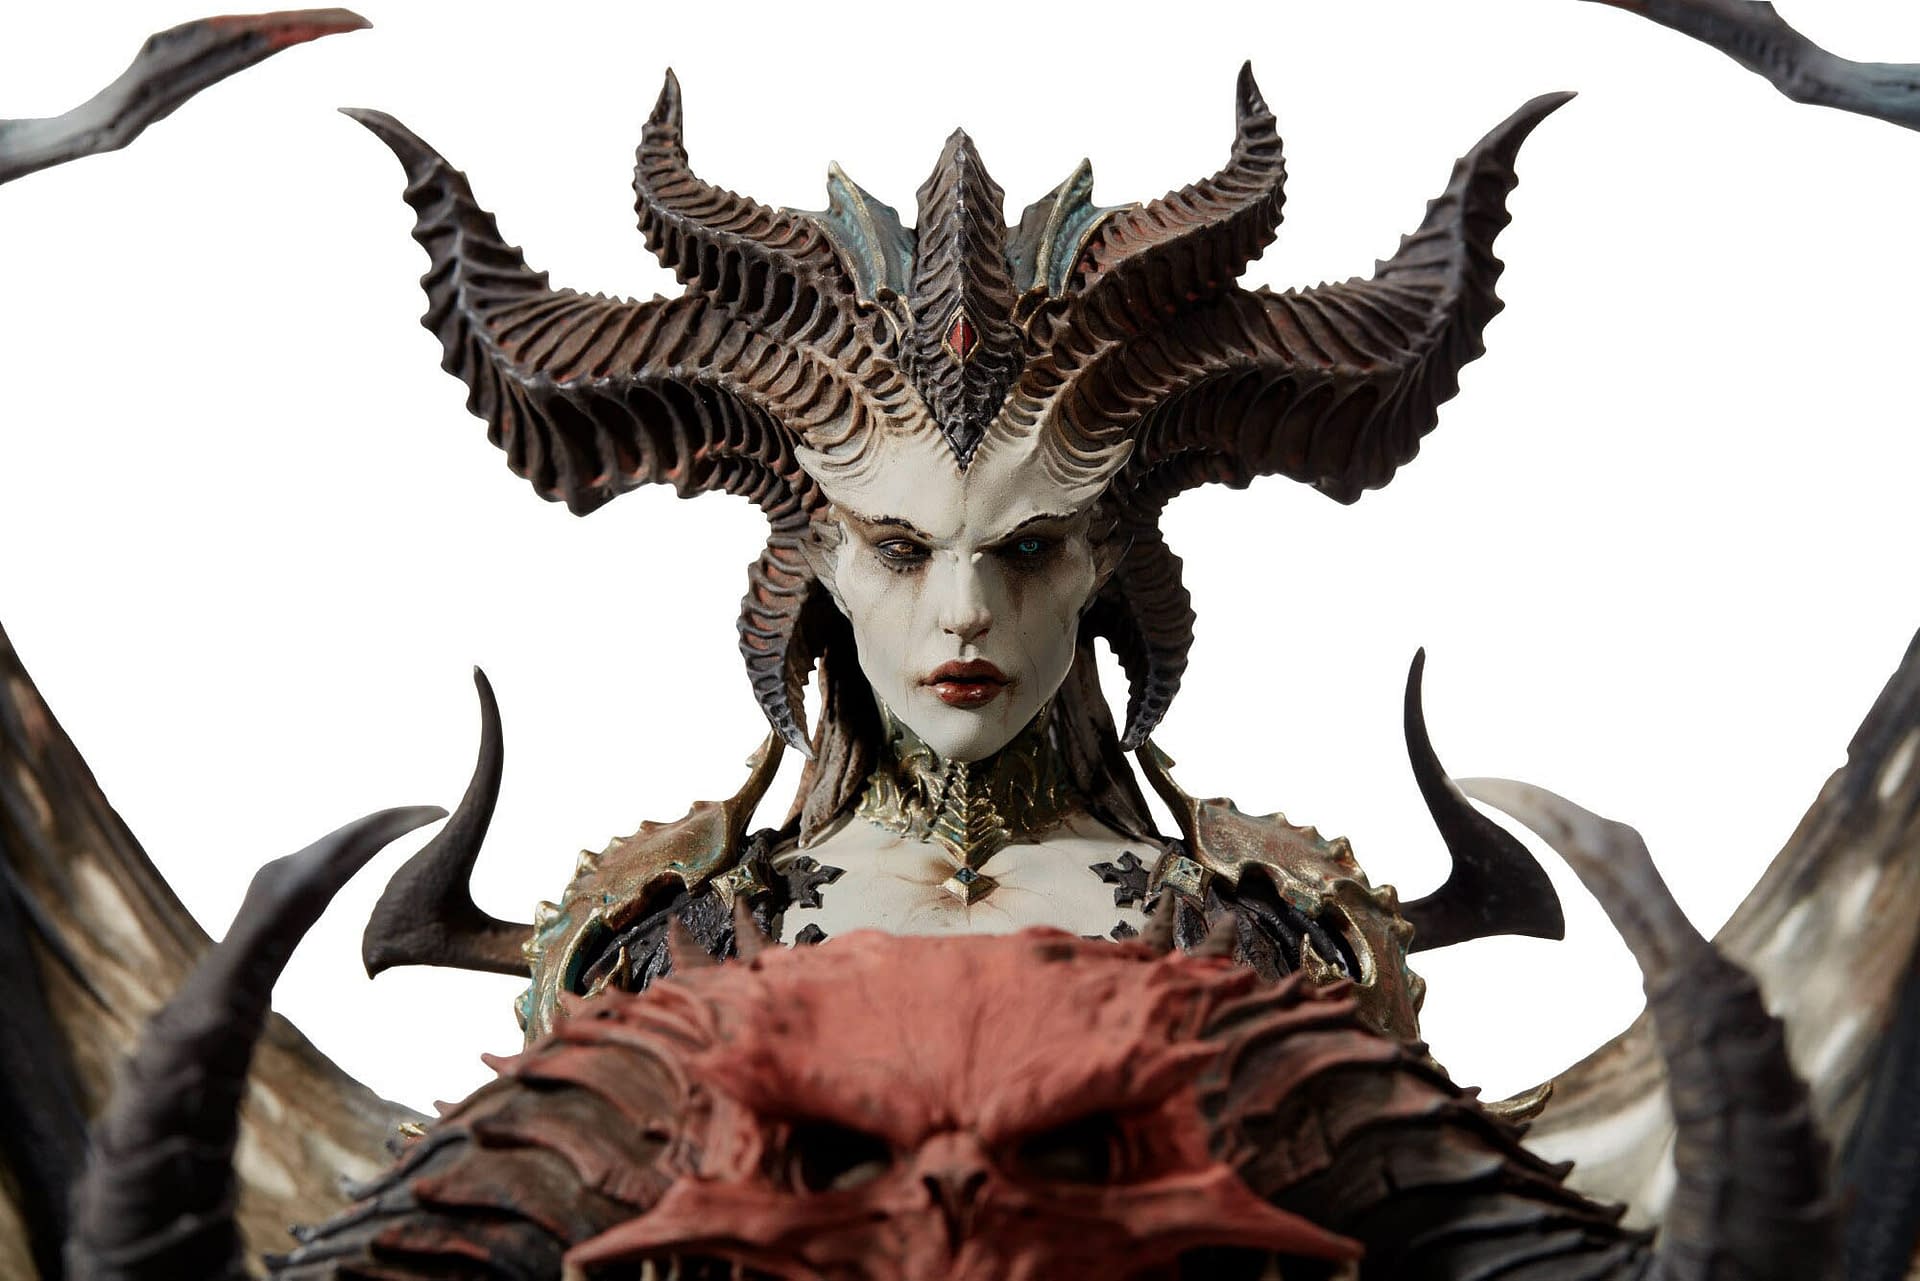 "Diablo IV" Lilith Has Arrived in New Premium Statue from Blizzard